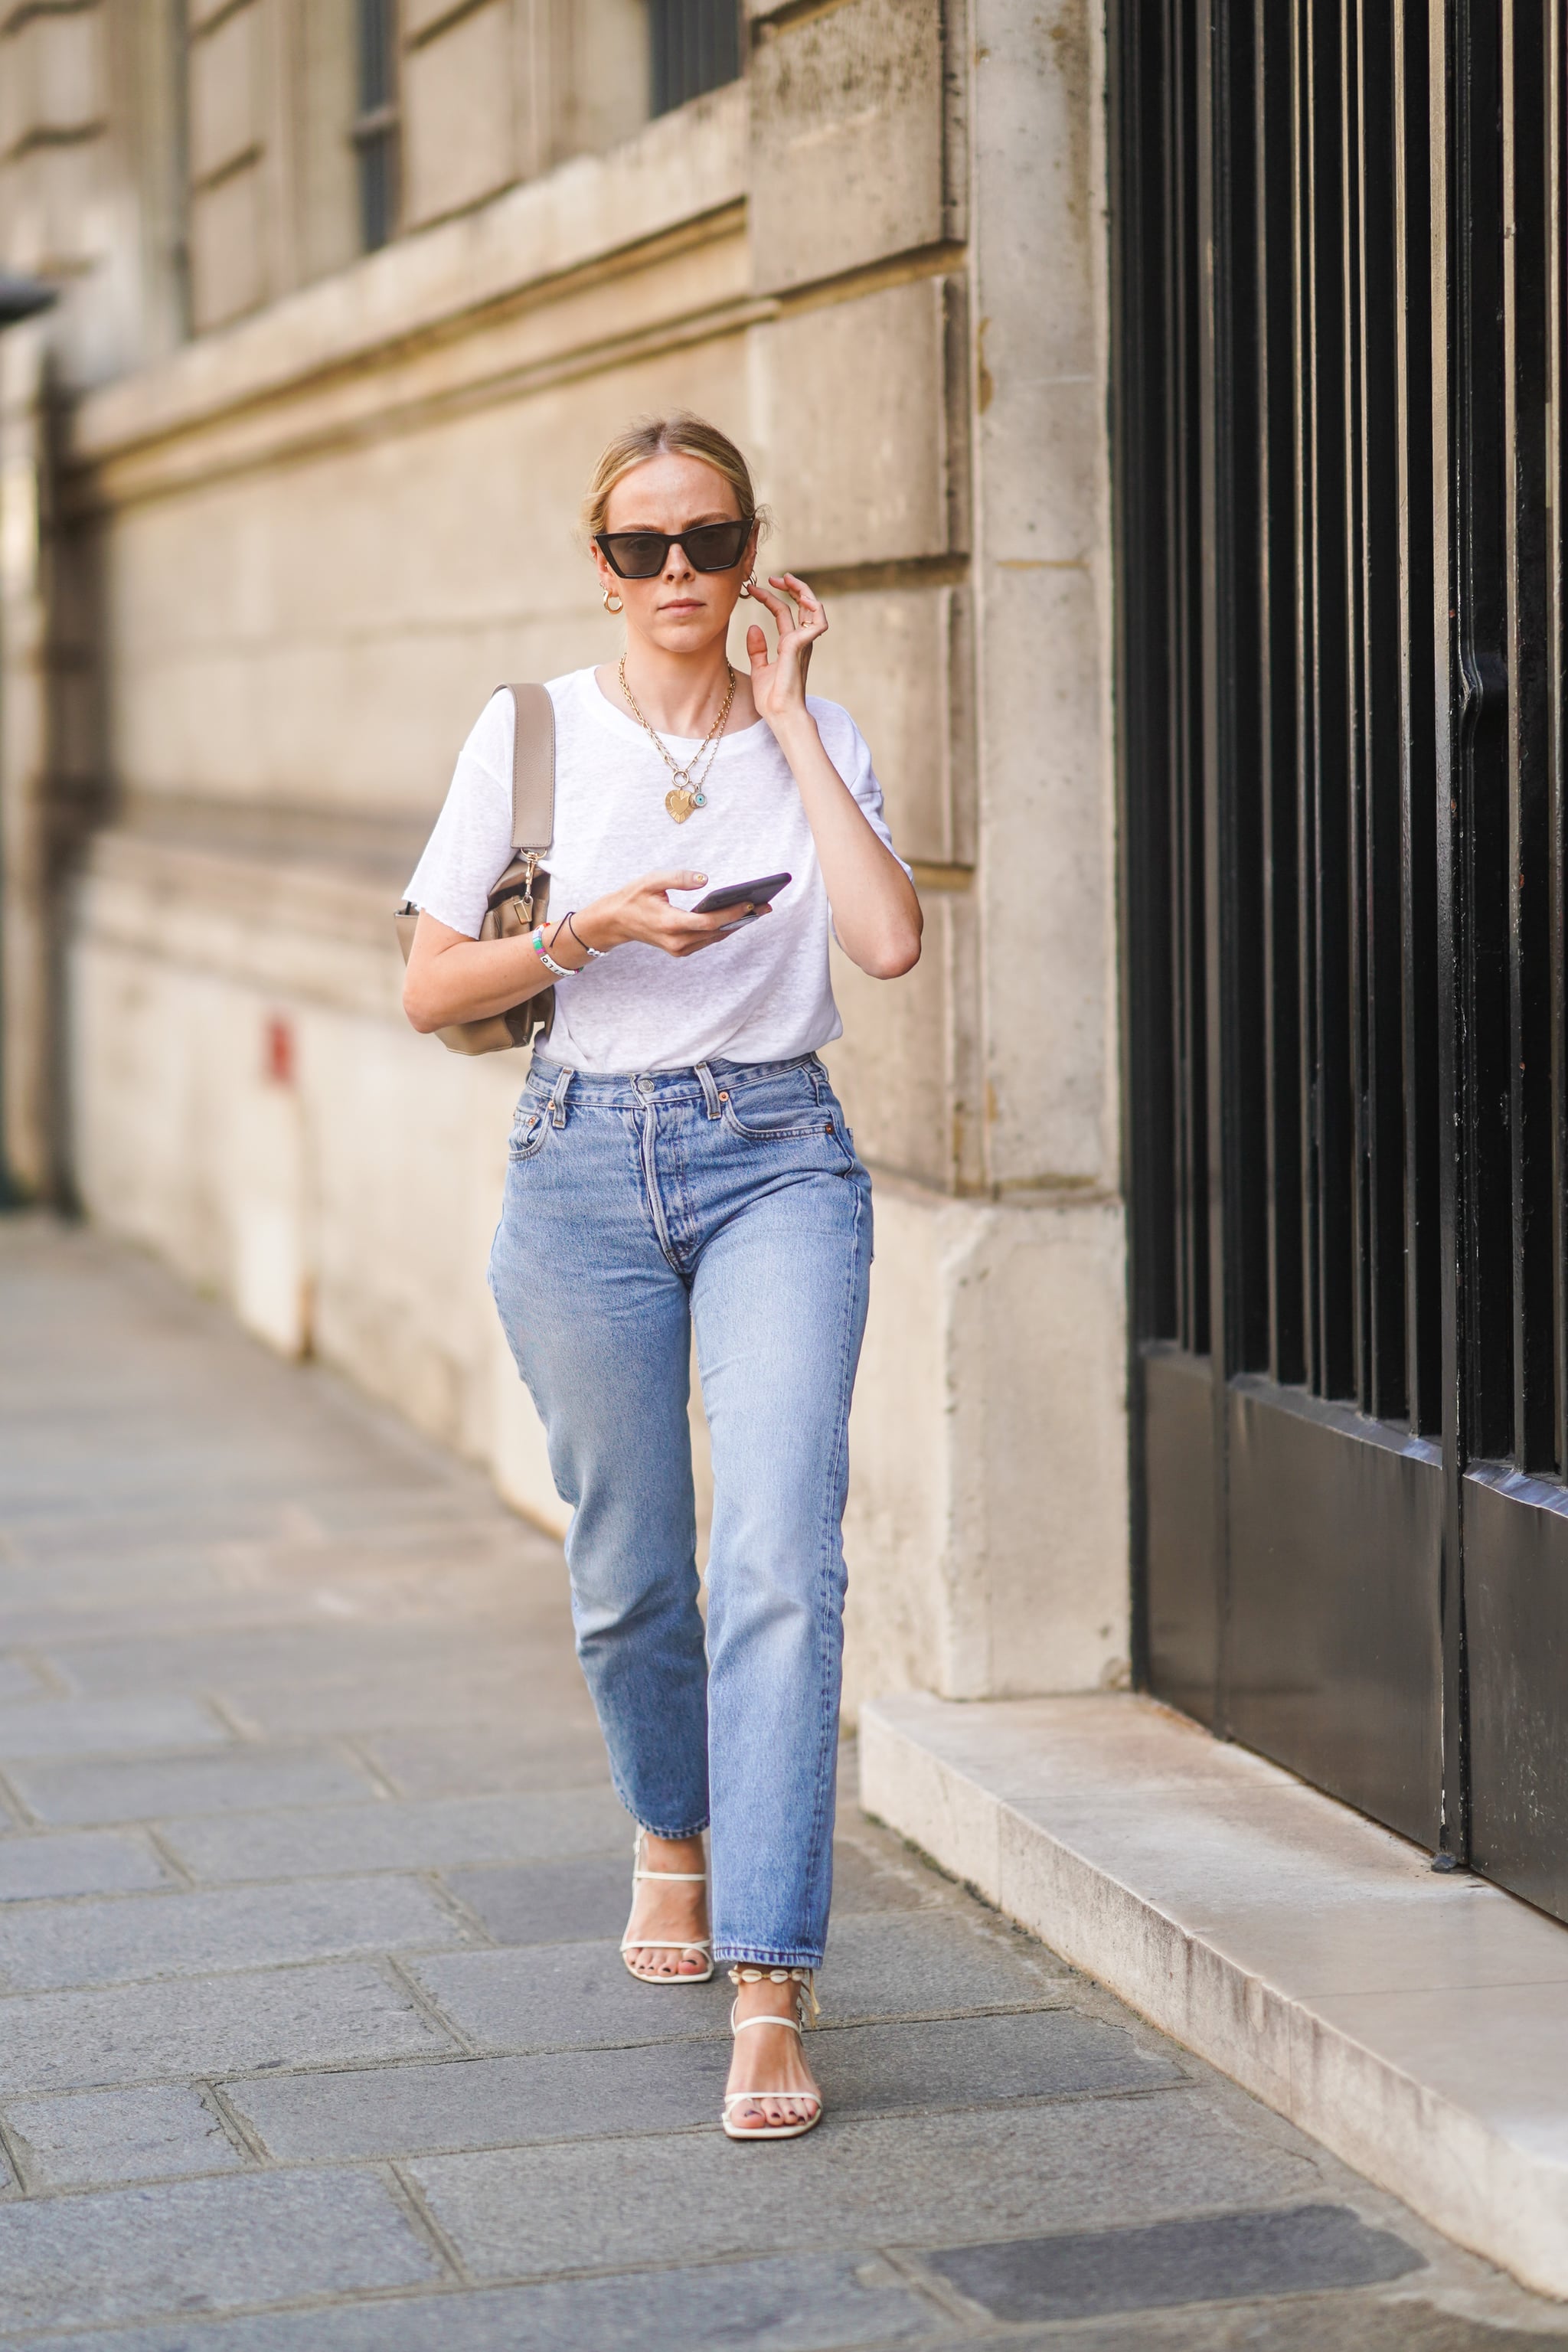 Think Simple: A White Tee, Mom Jeans, and Strappy White Sandals